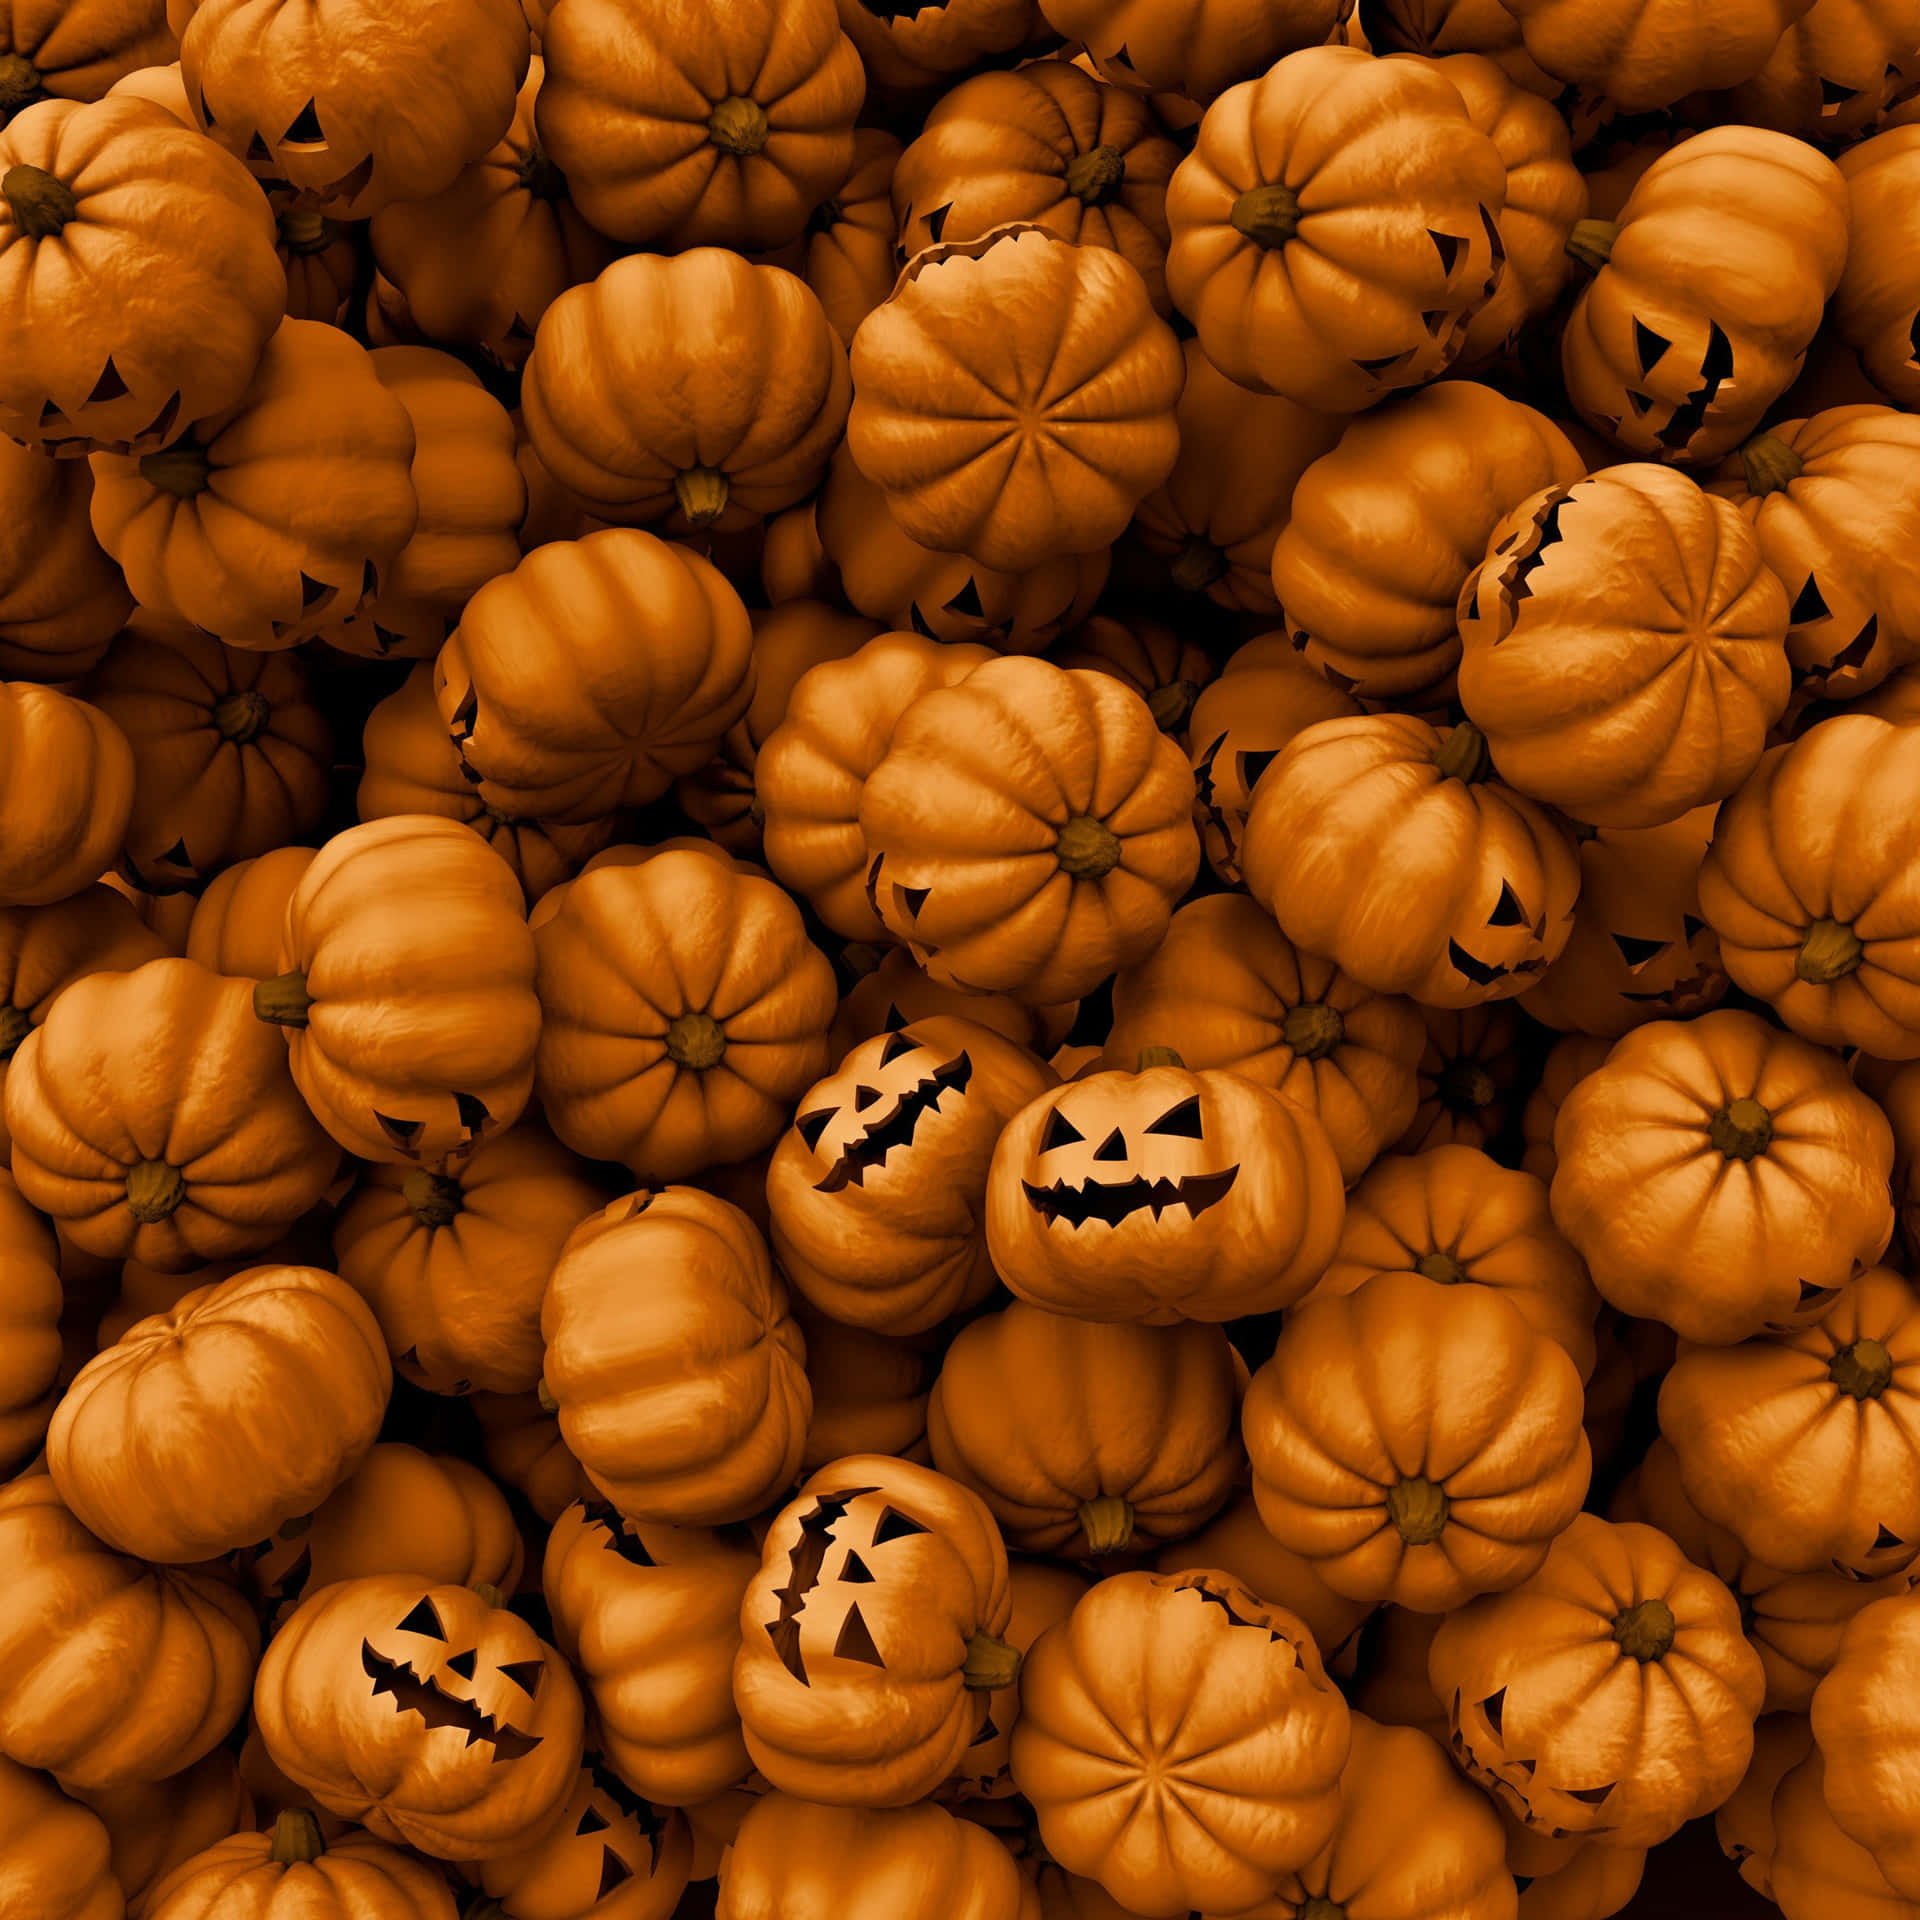 A Pile Of Pumpkins With Faces On Them